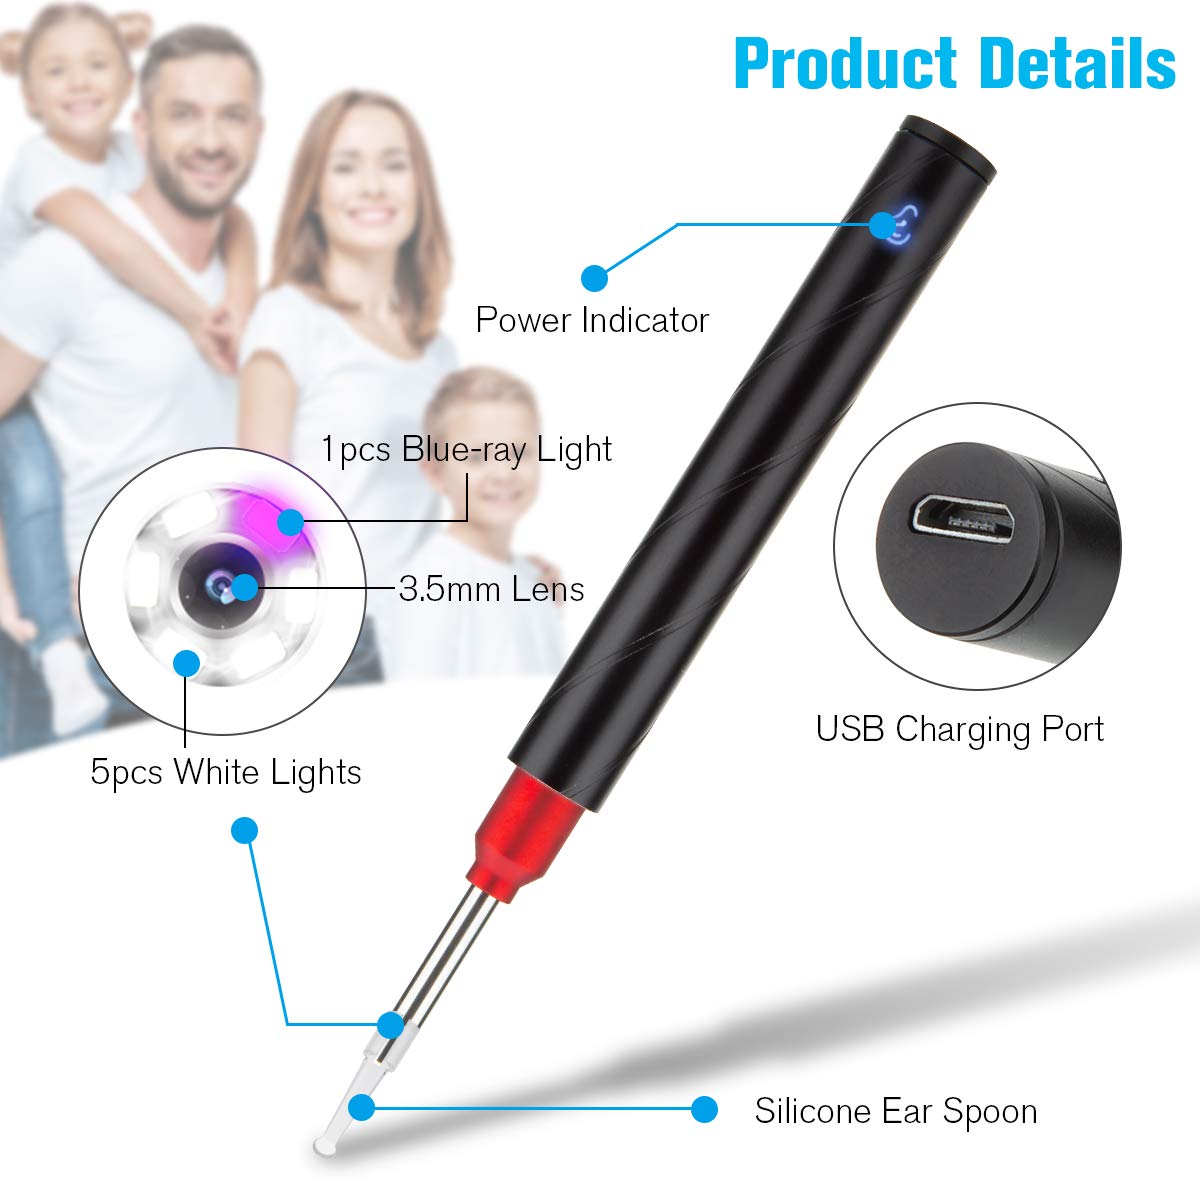 JOYGIFT Ear Wax Remover,Wireless Otoscope Earwax Removal Tool 1080P HD WiFi Ear Endoscope with LED Light,3.5mm Visual Ear Scope Camera Safe Ear Pick Ear Cleaning Endocsope Kit for Adults Kids & Pets